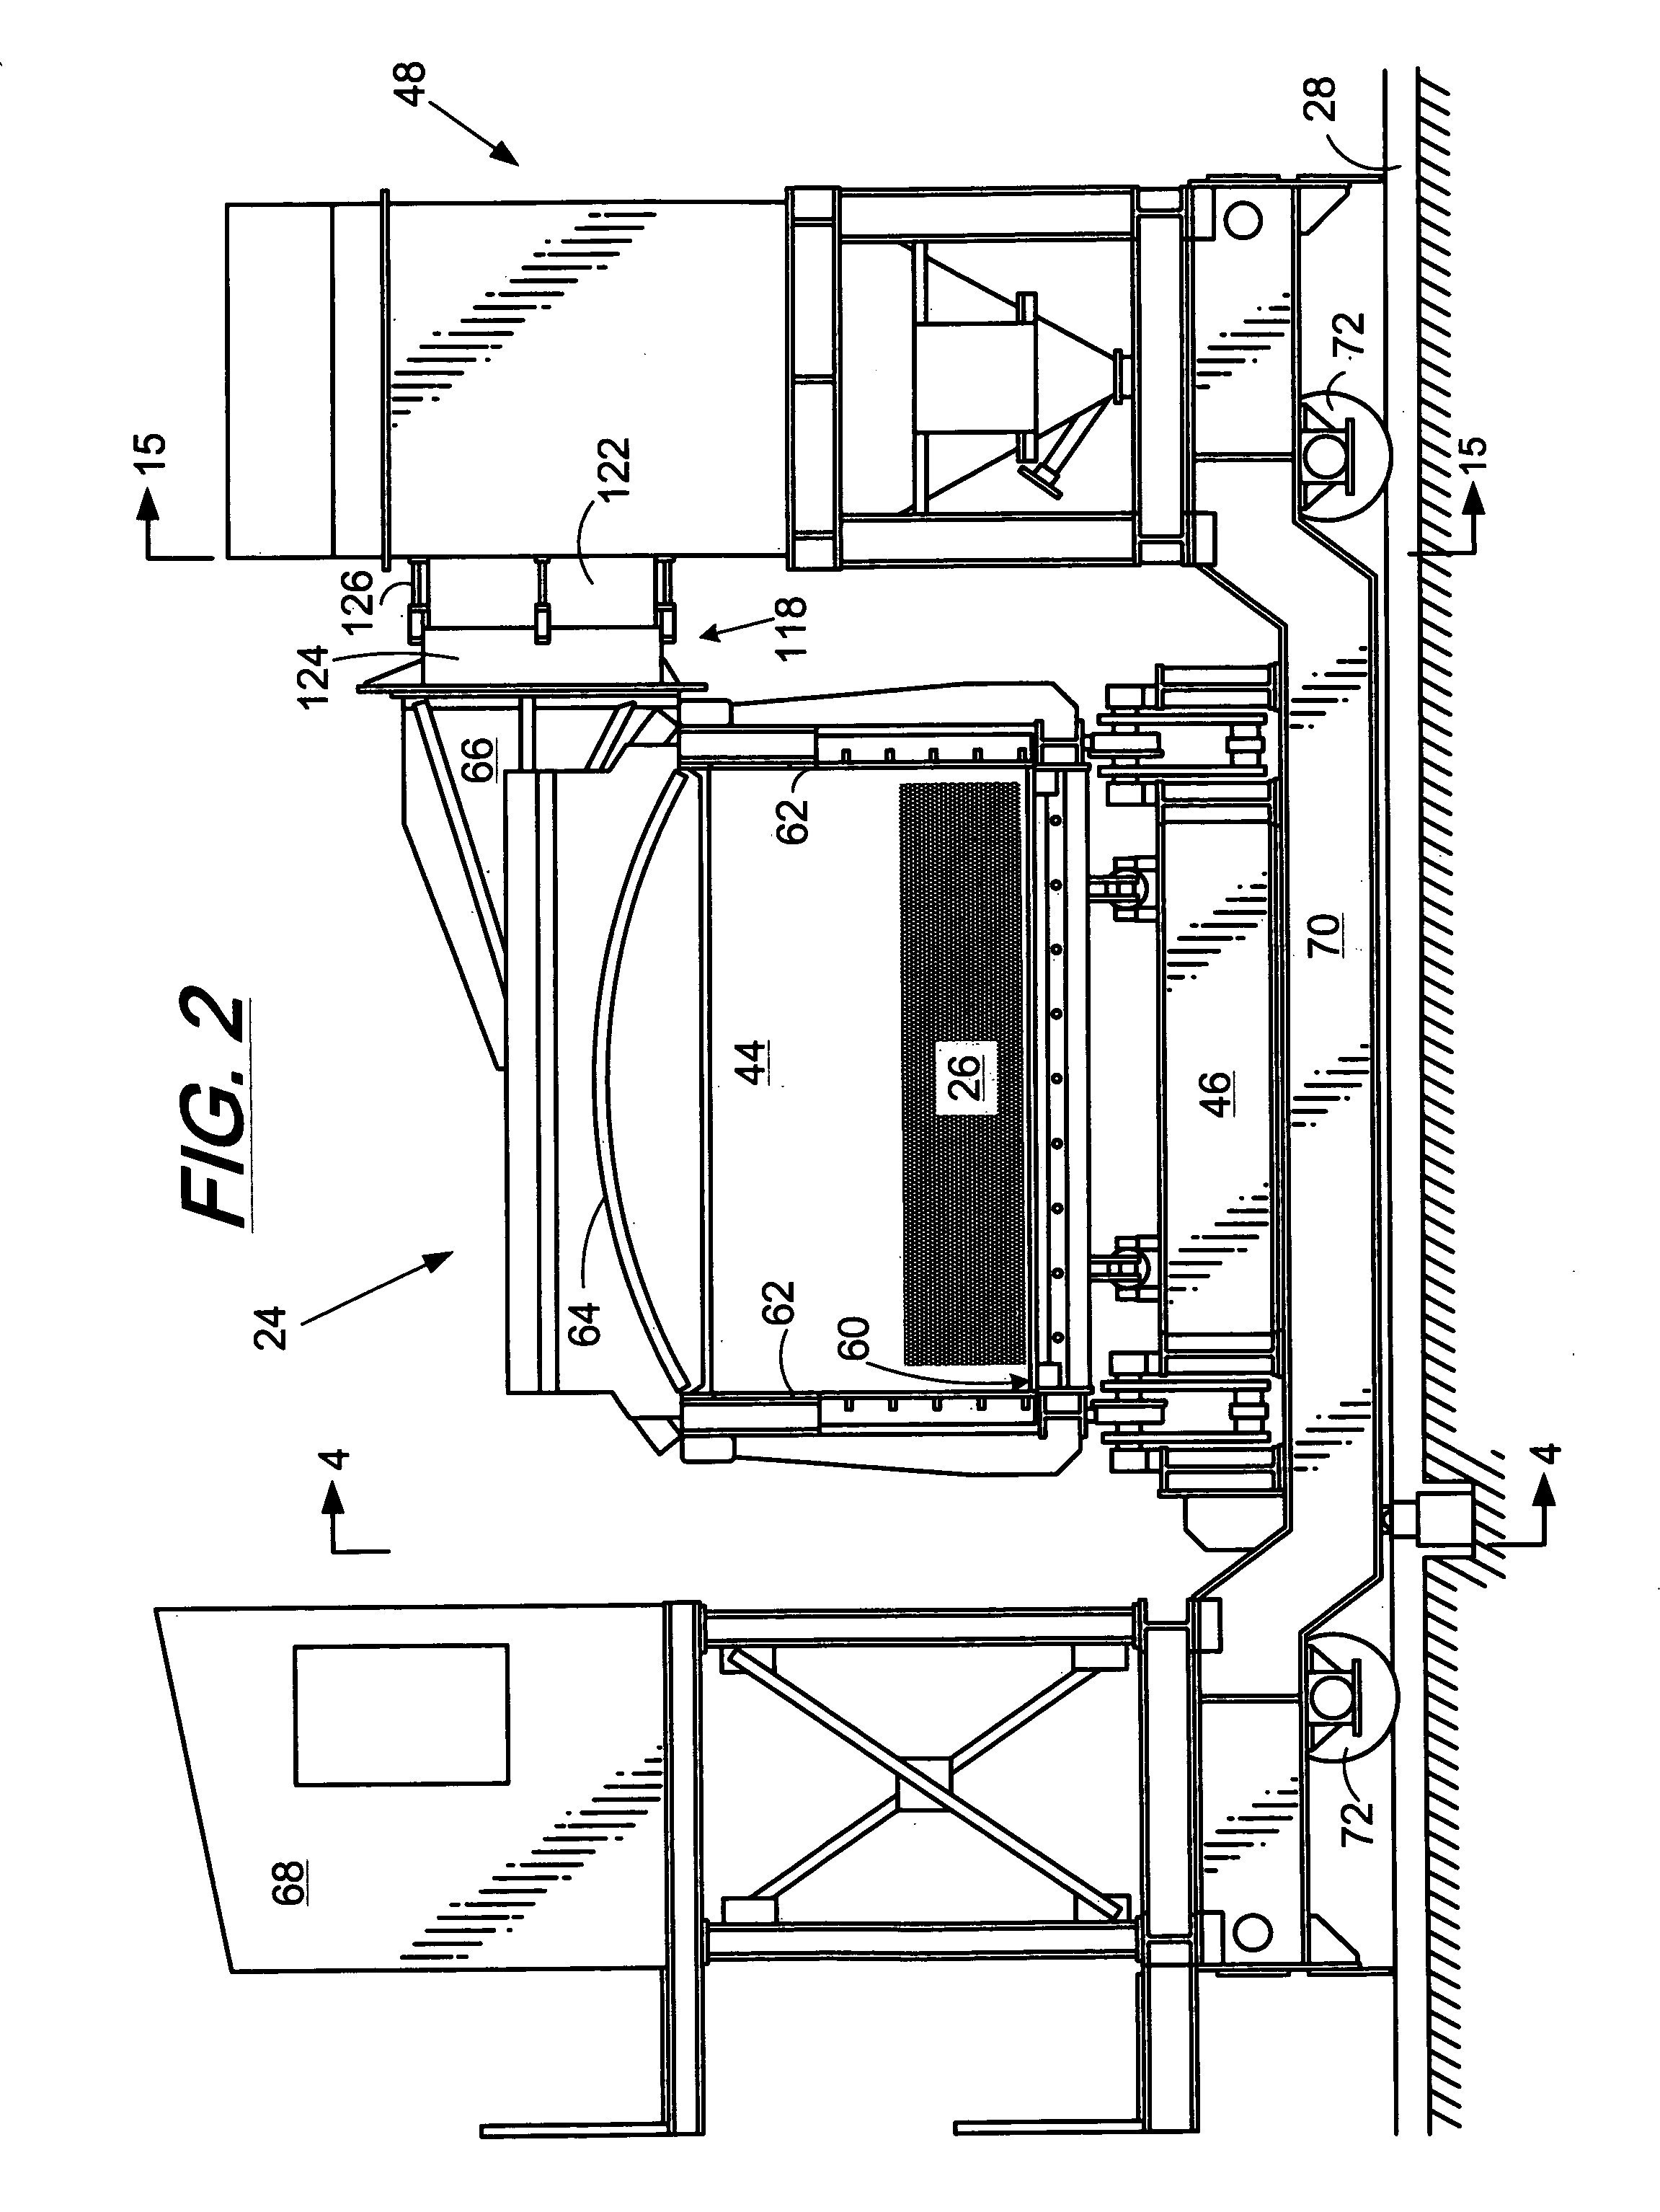 Method and apparatus for producing coke